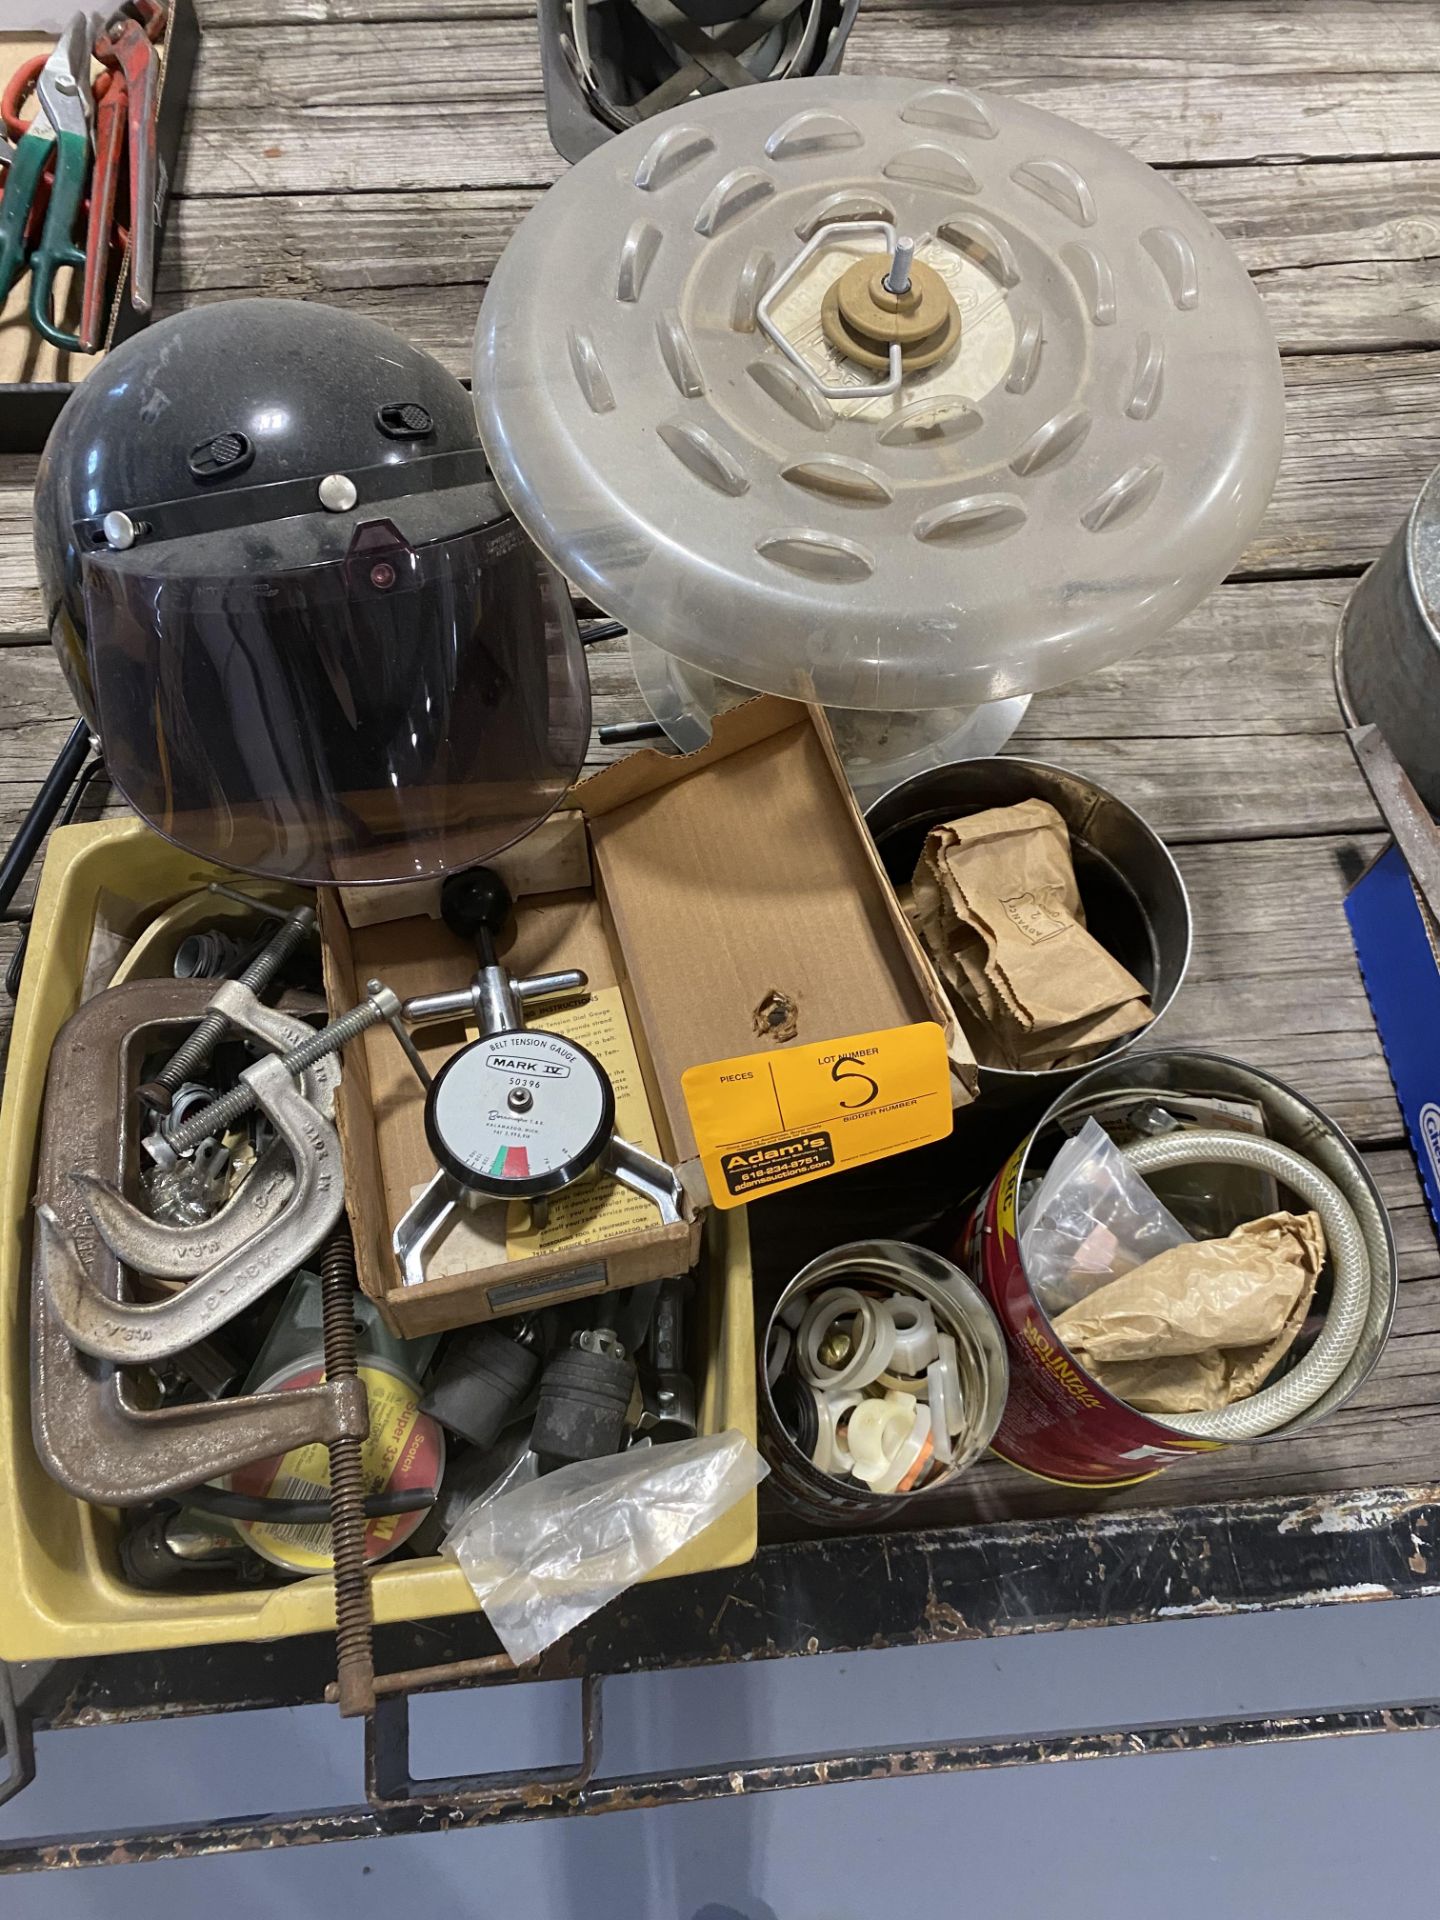 MOTORCYCLE HELMET, MADNIFY LIGHT, BIRD FEEDER, WIRE CONNECTS, AND MORE